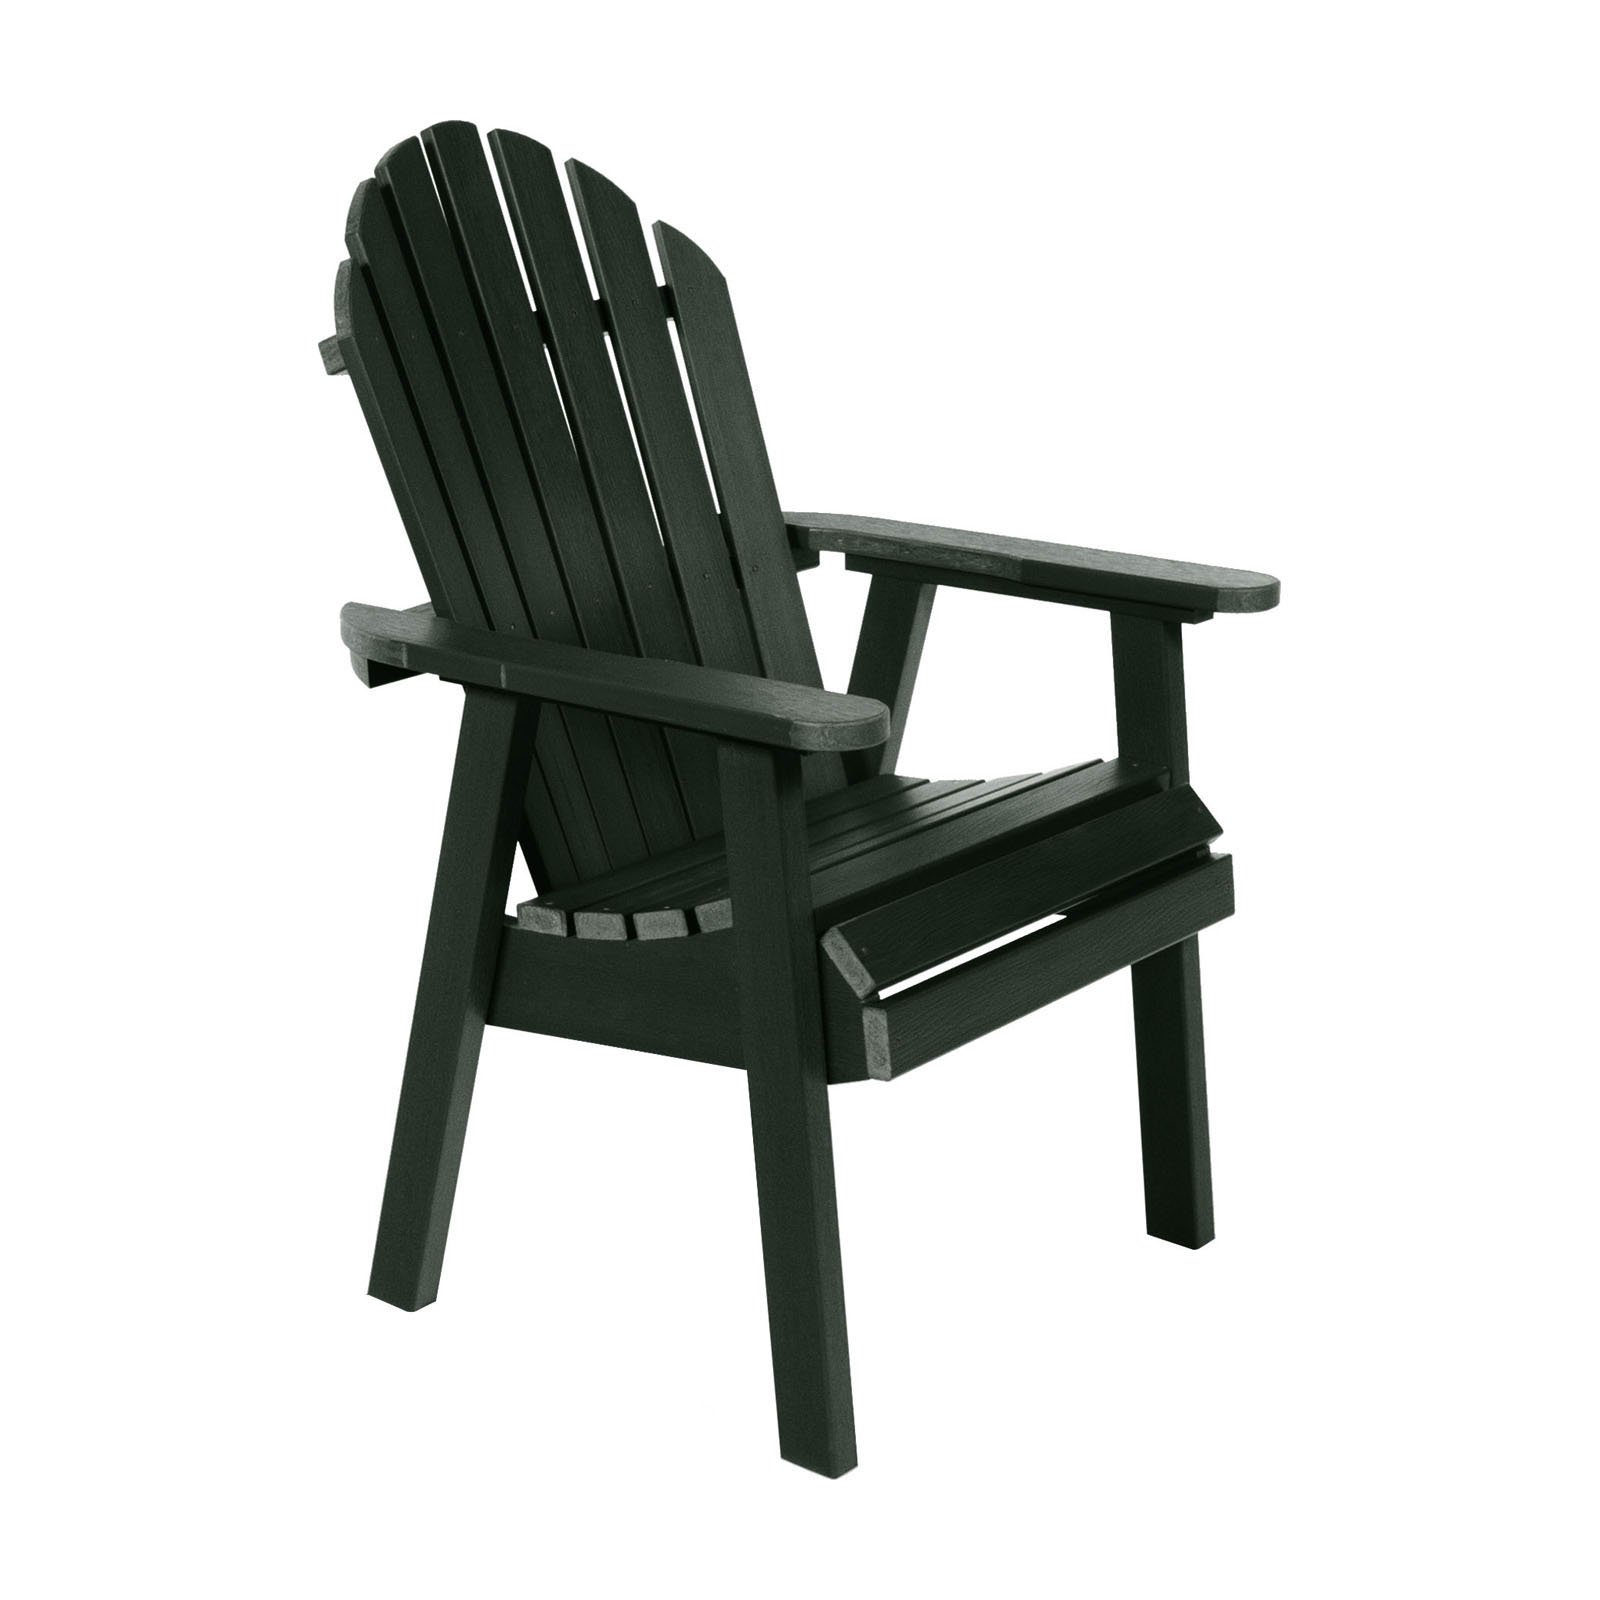 The Sequoia Professional Commercial Grade Muskoka Adirondack Deck Dining Chair - image 1 of 5